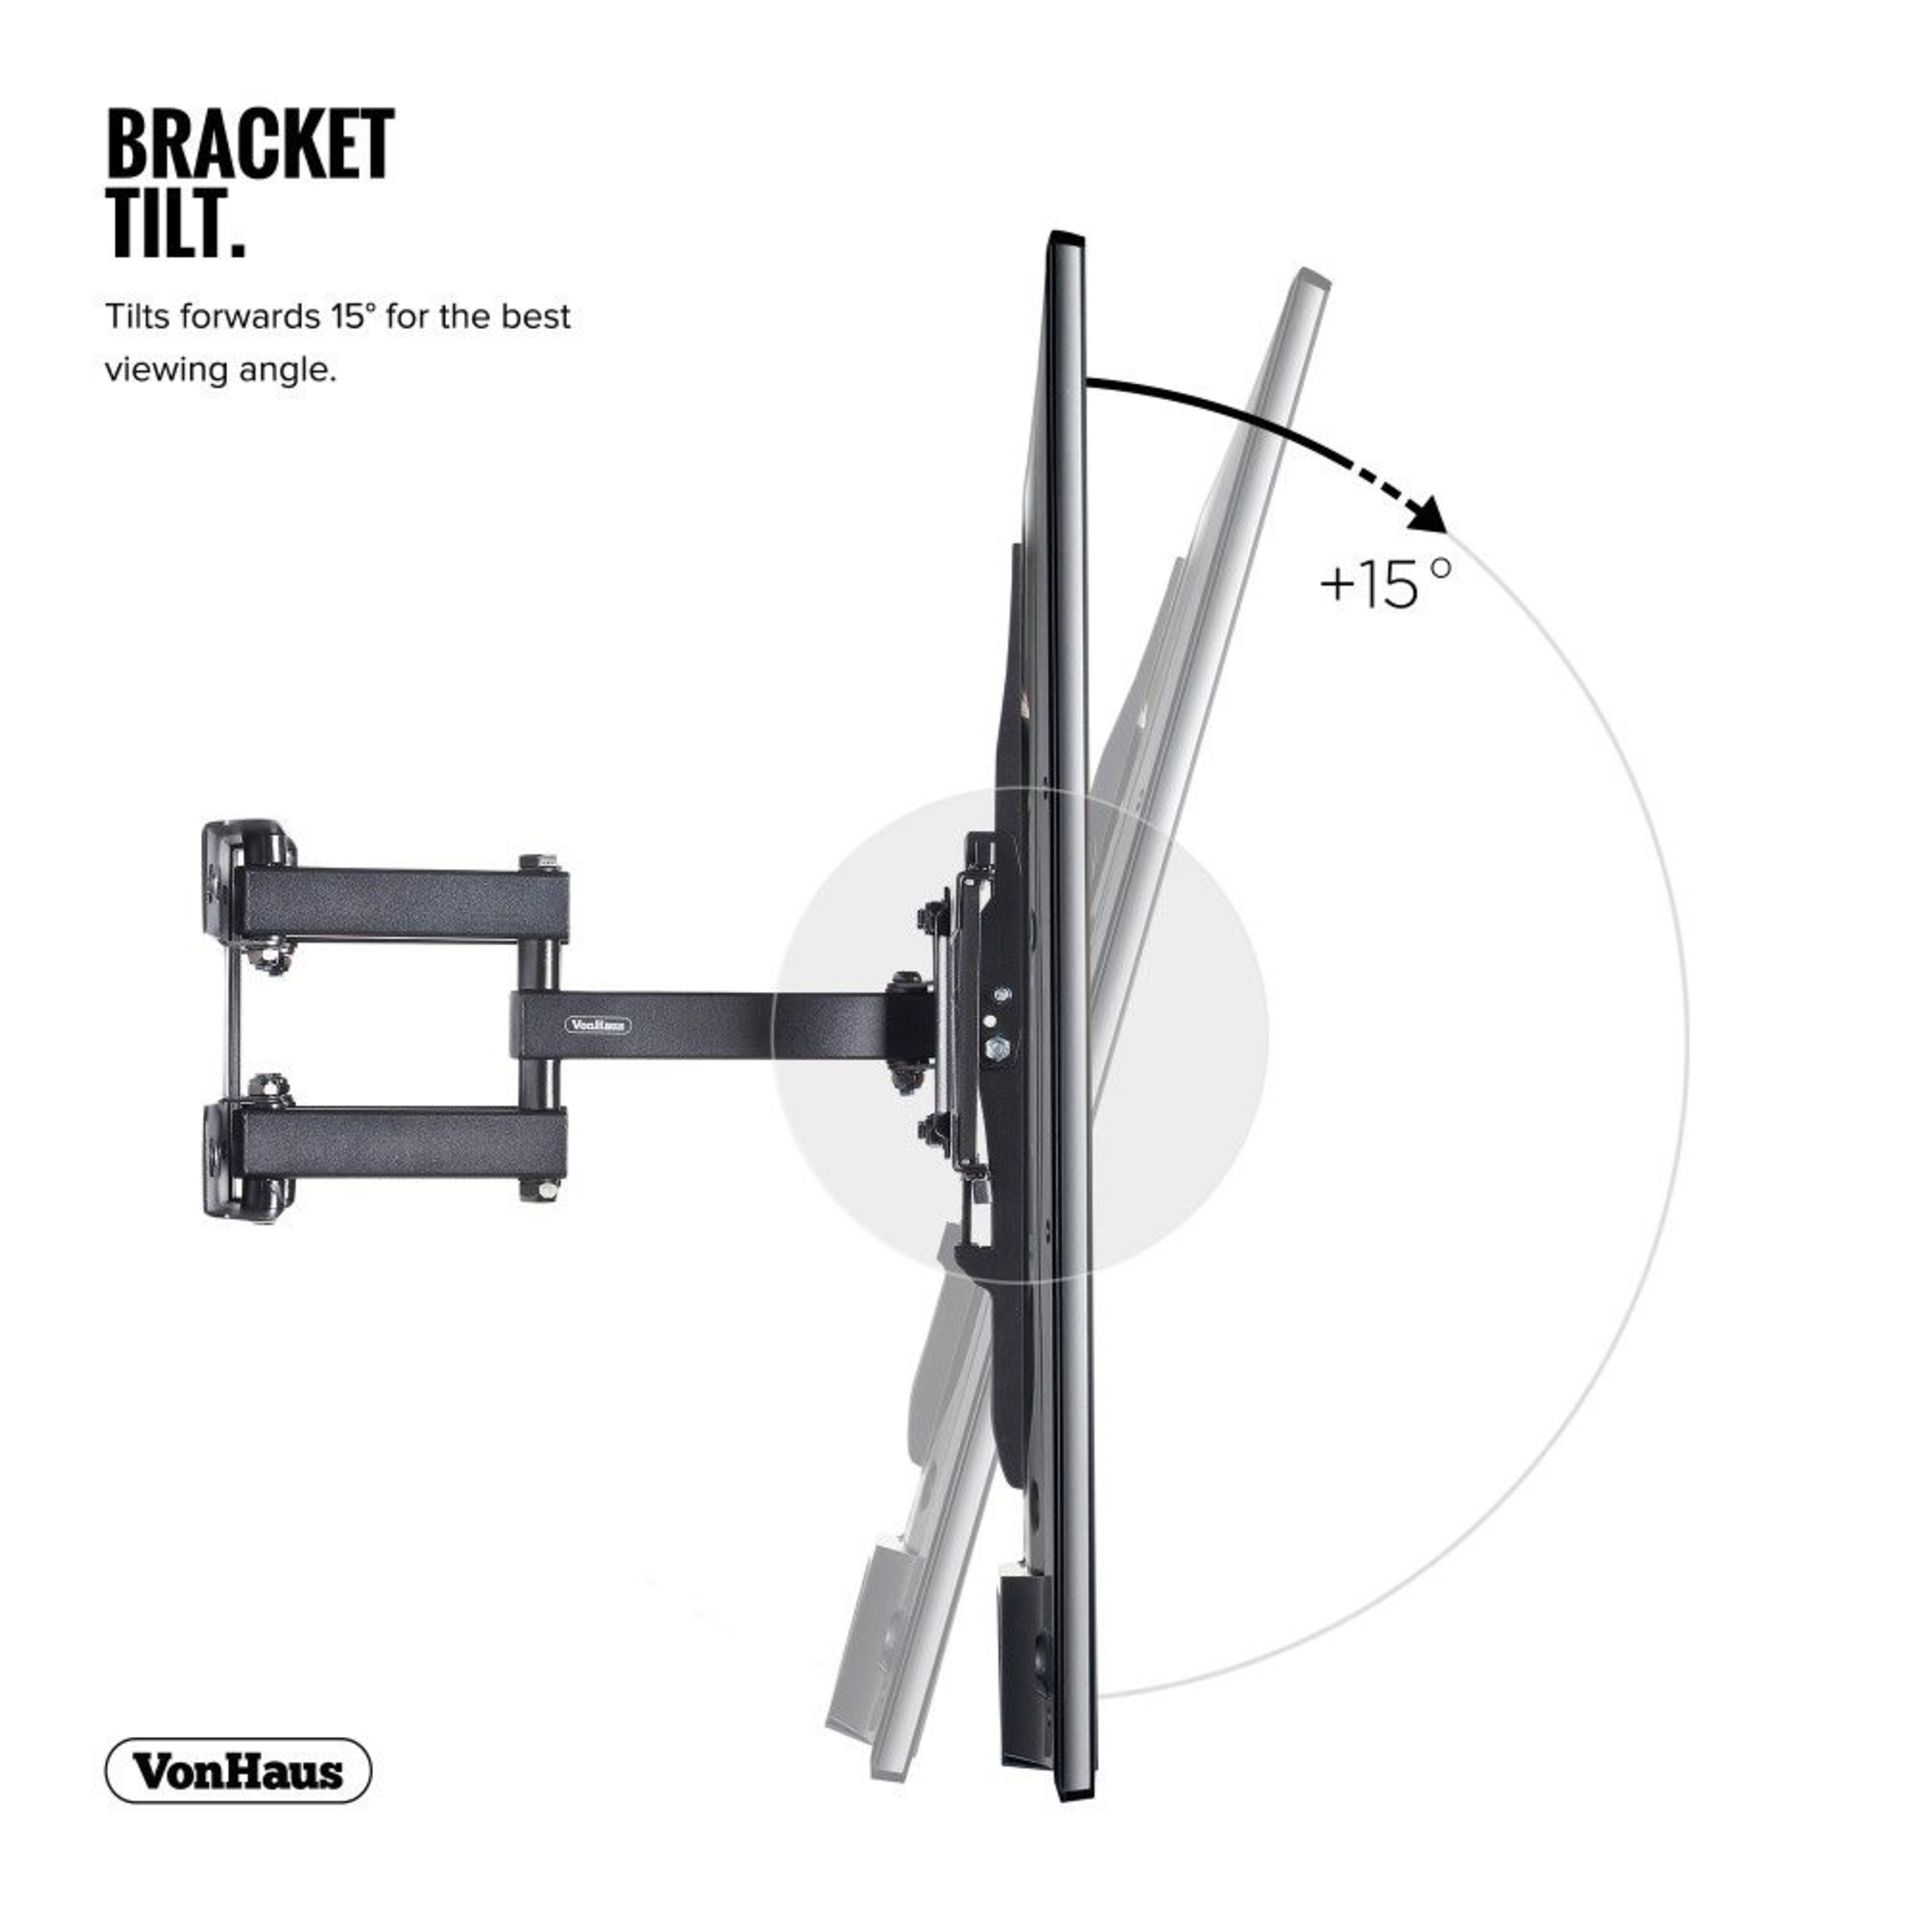 (KG19) 23-56 inch Cantilever TV bracket. Please confirm your TV’s VESA Mounting Dimensions an... - Image 2 of 4